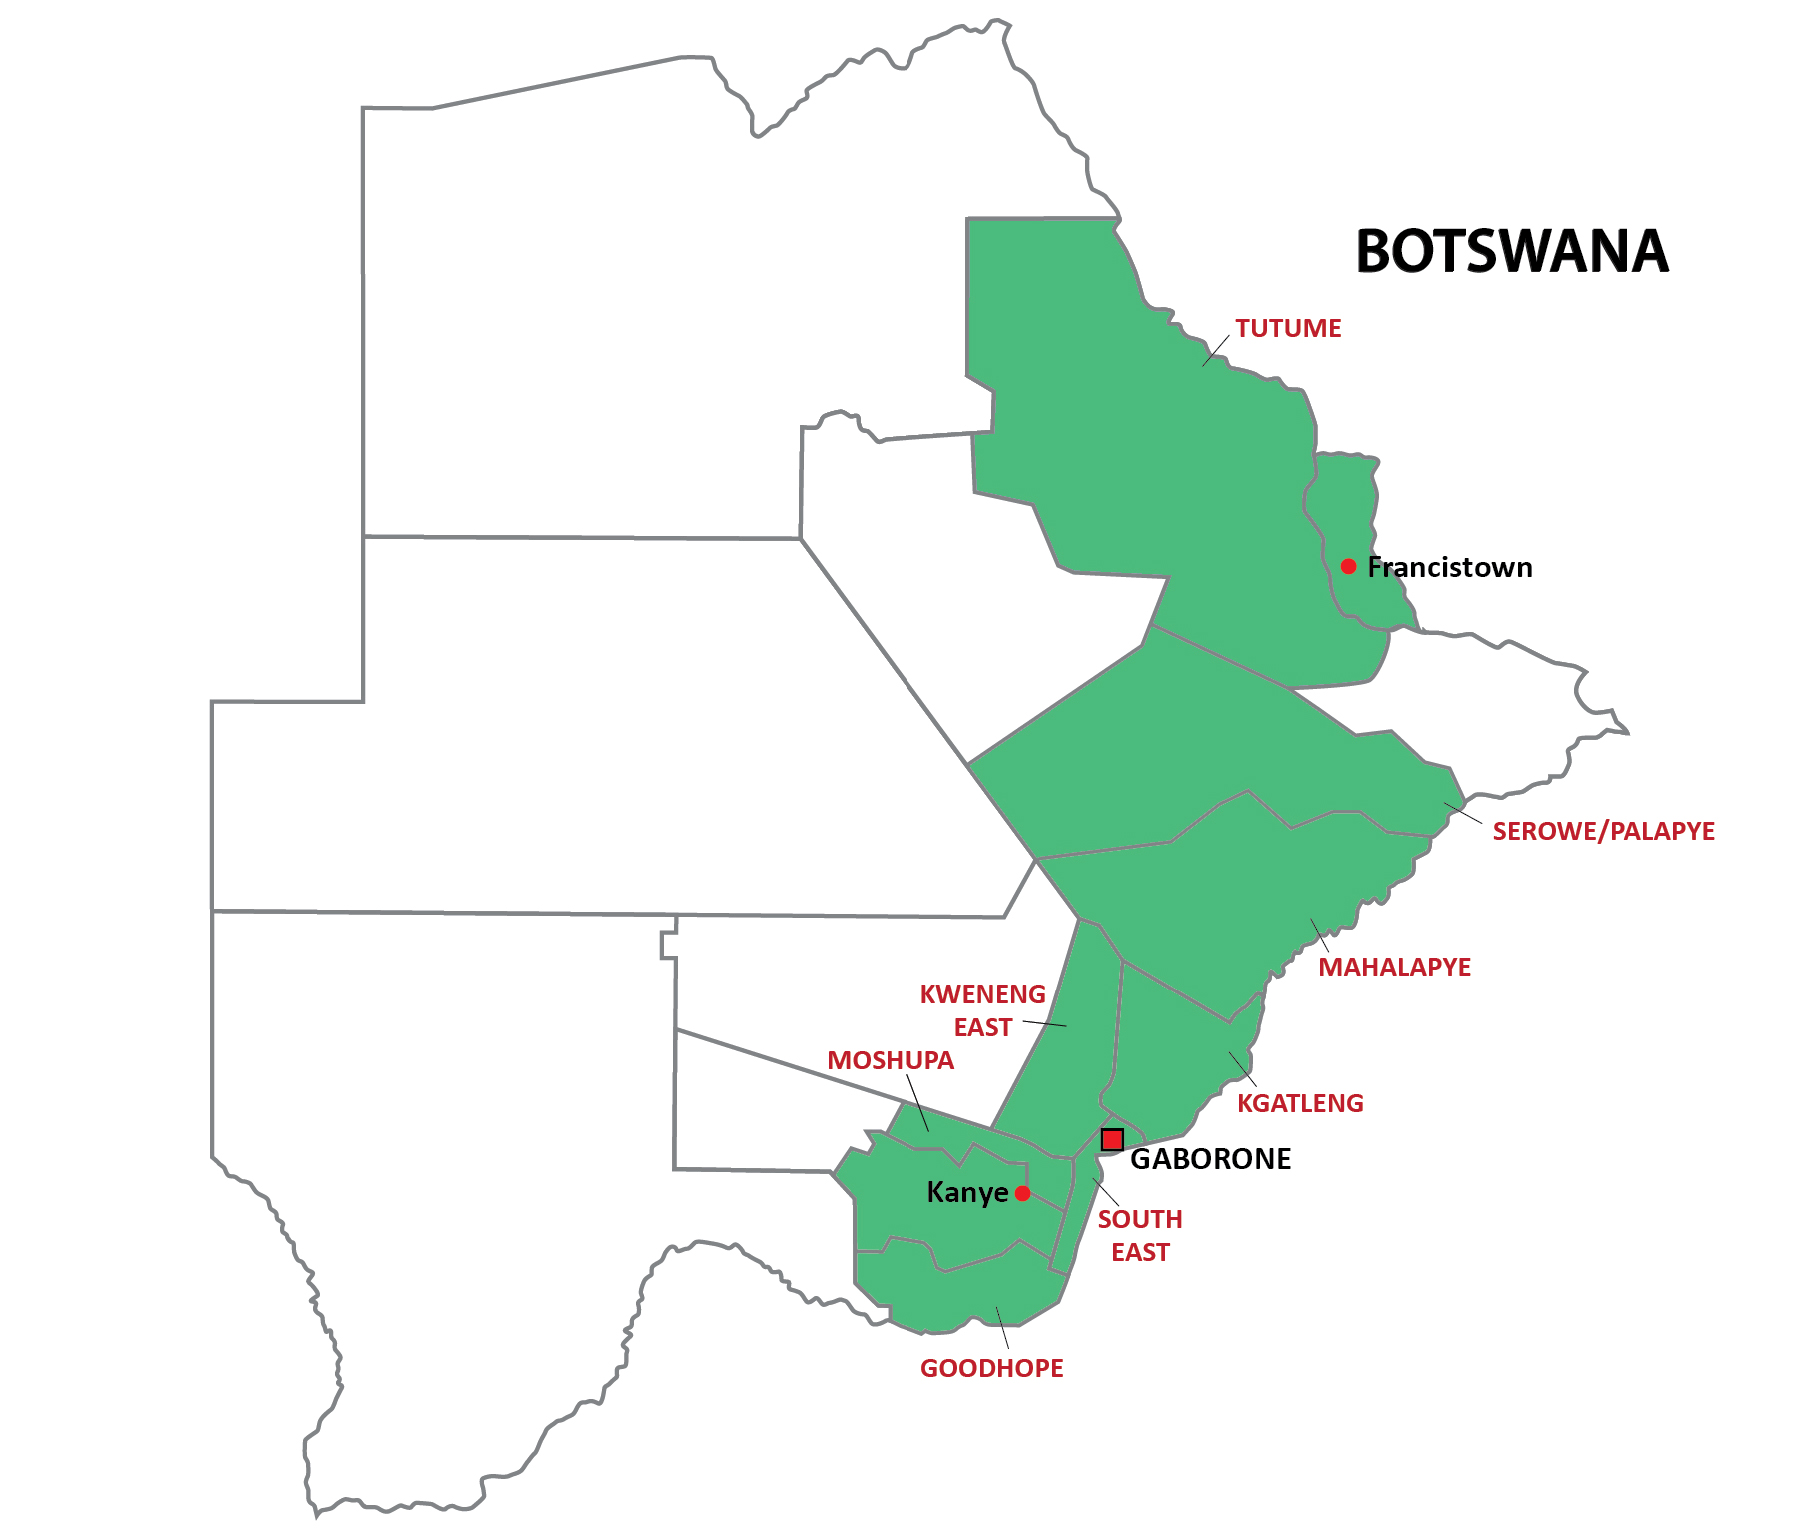 A map of the shaded in health districts that PEPFAR works in Botswana for tuberculosis.